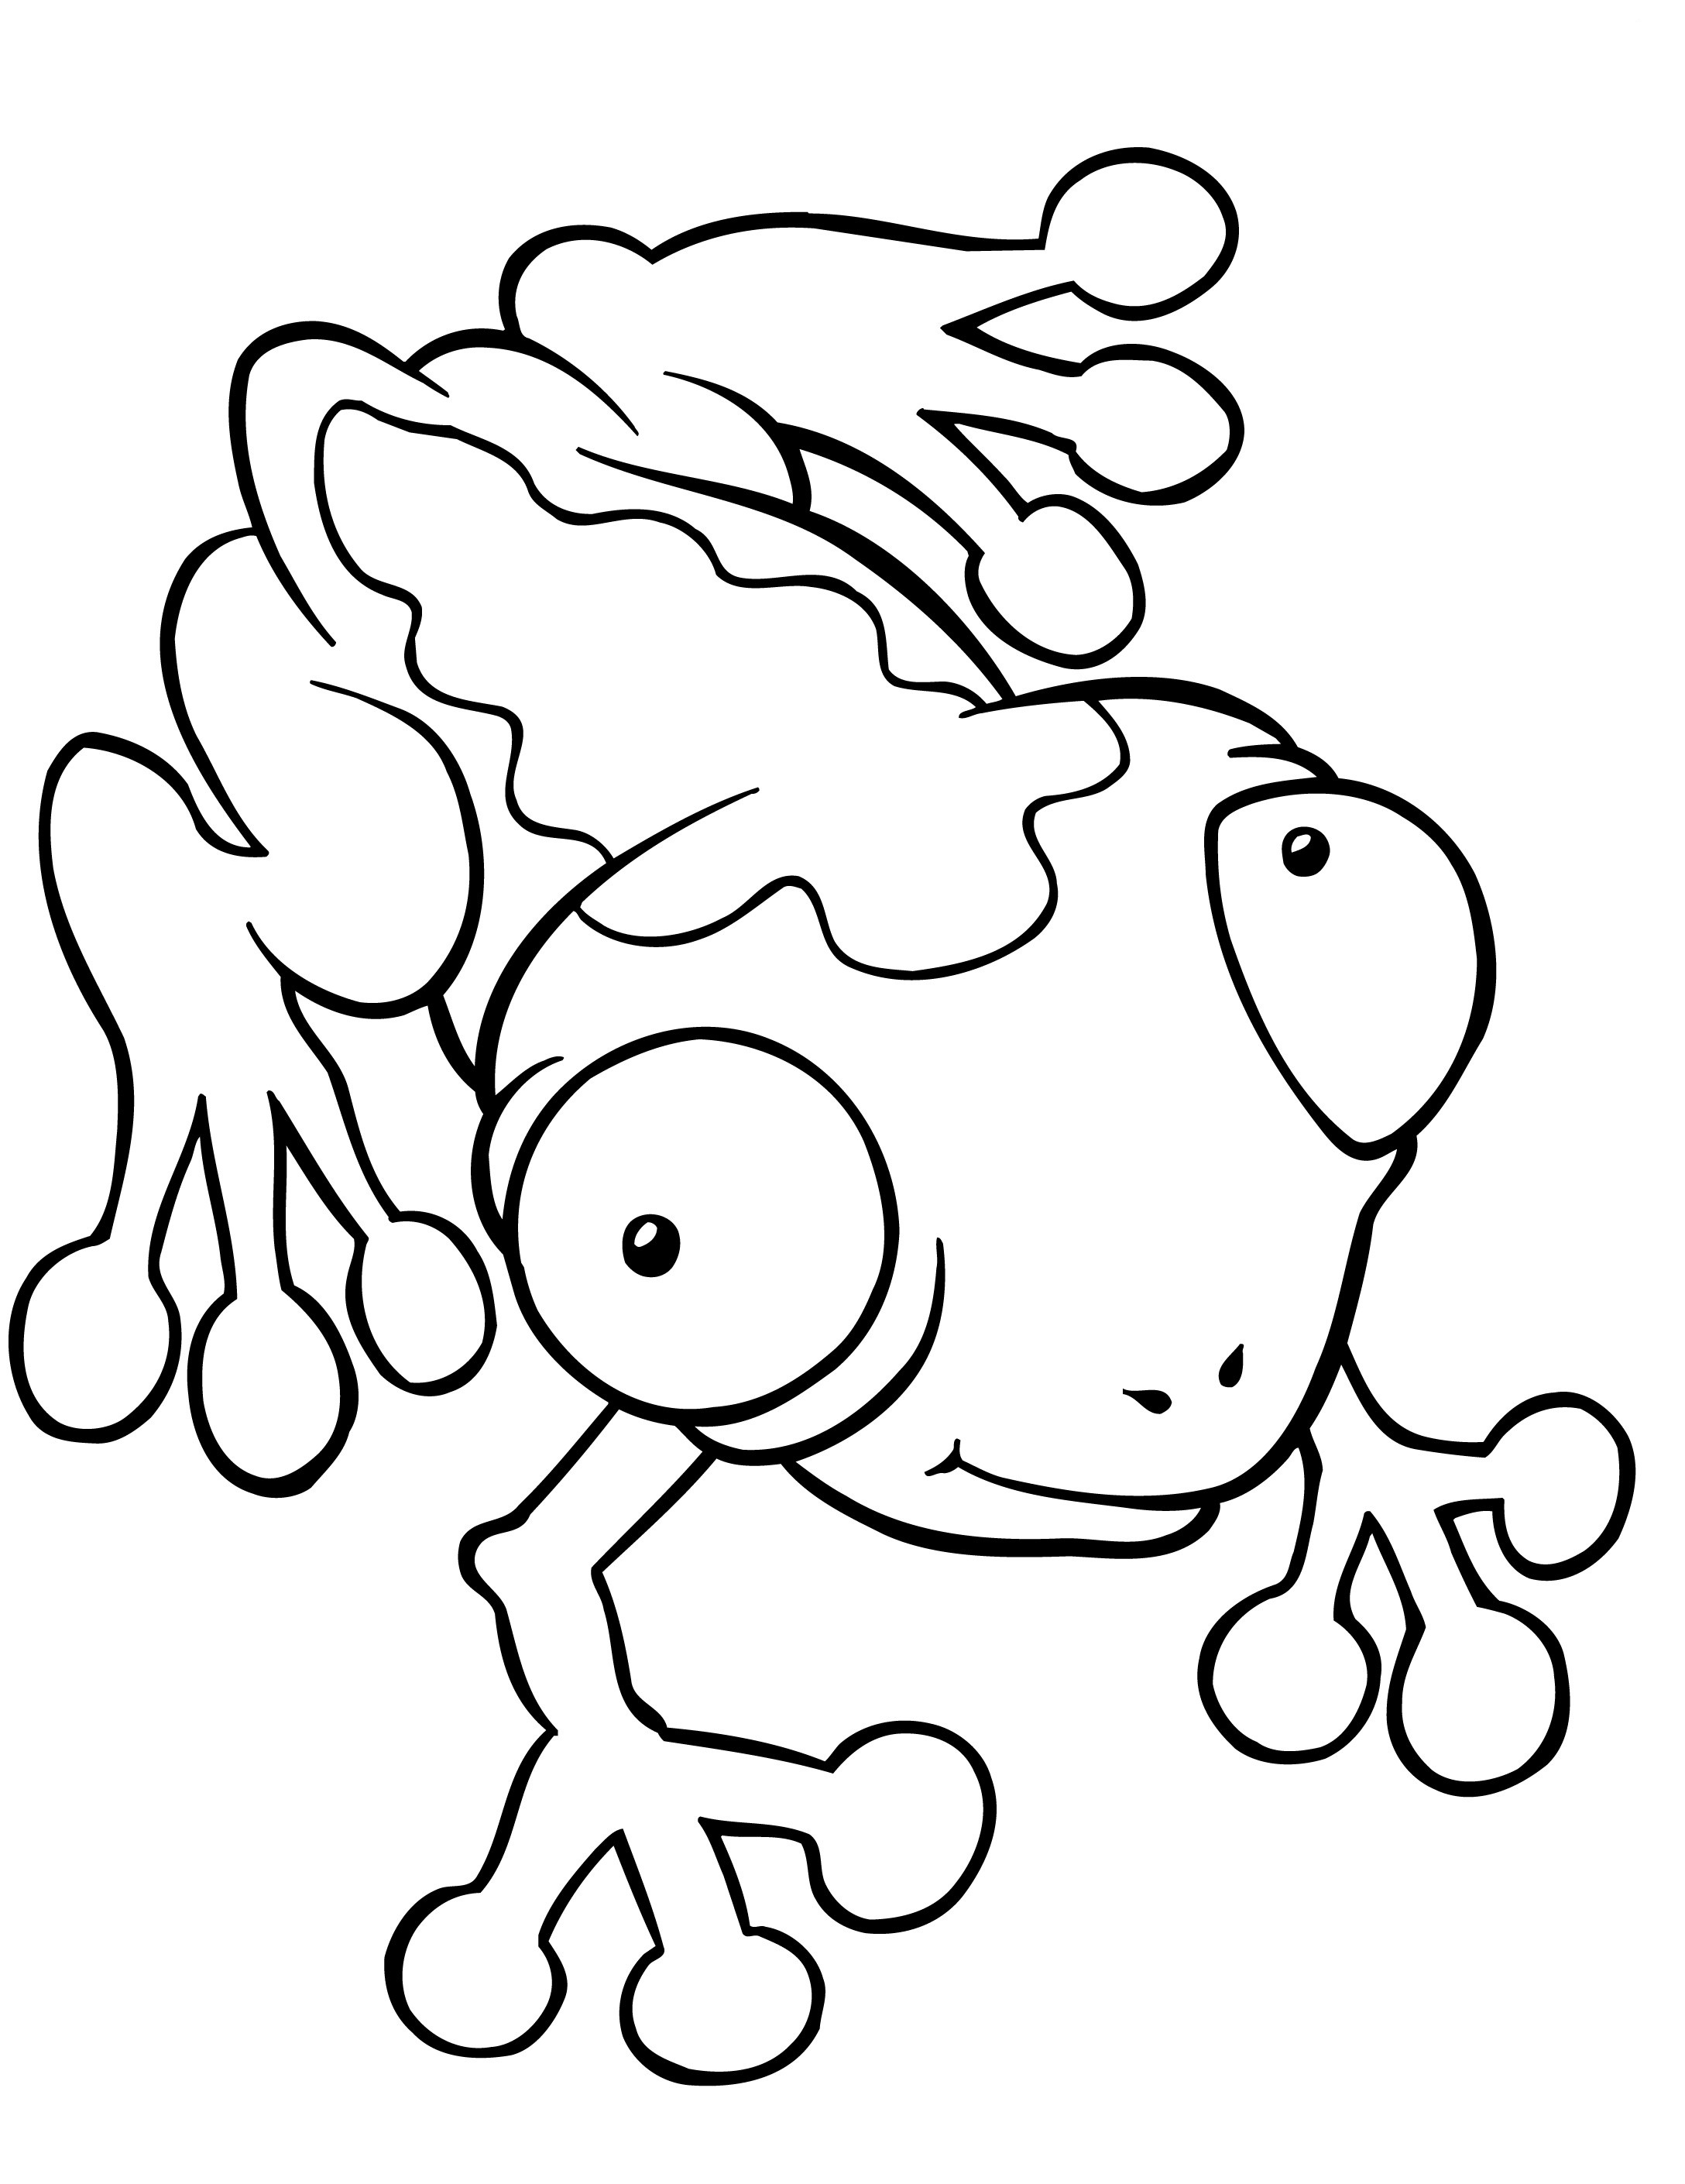 Printable Frog Coloring Pictures 10